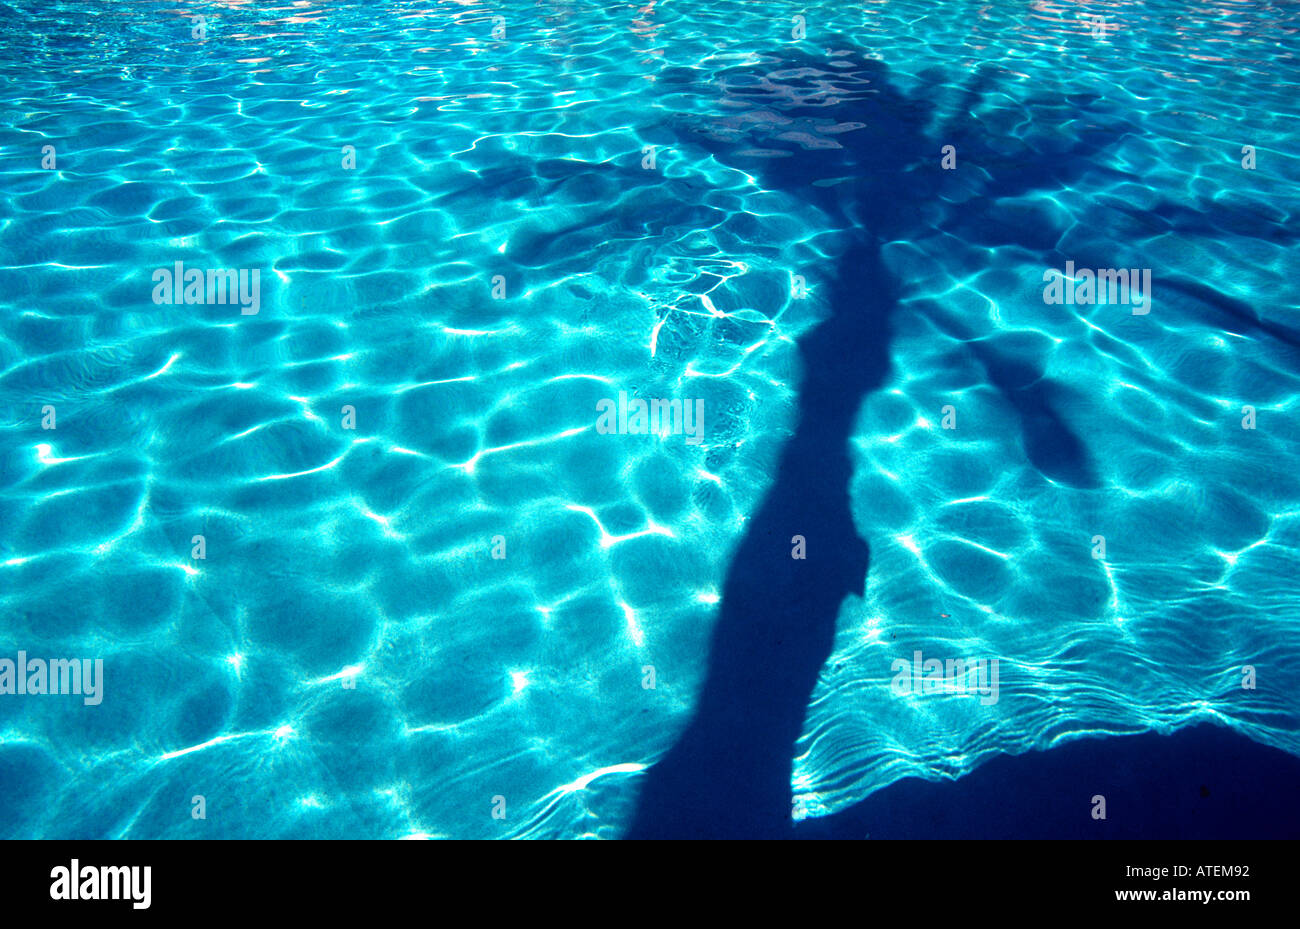 Reflection of a palm tree in a swimming pool Sharm el Sheikh Egyt Red Sea split level Stock Photo